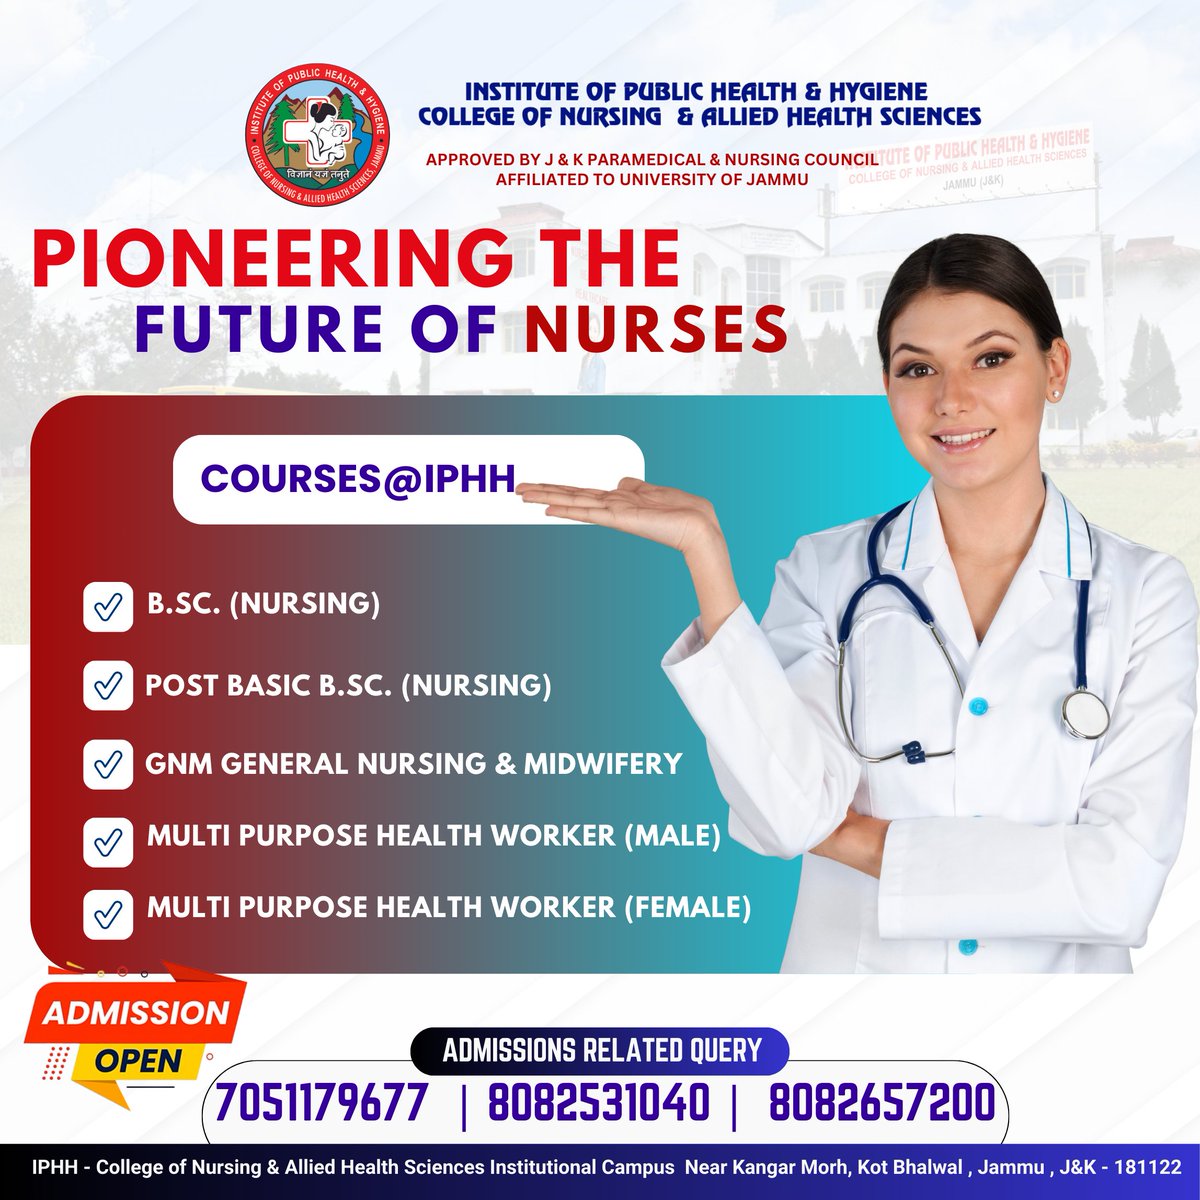 👩‍⚕️YOUR SEARCH FOR THE BEST NURSING COLLEGE ENDS HERE!
▪️ POST BASIC B. Sc. (Nursing)
▪️ B. Sc. (Nursing)
▪️ GNM (General Nursing and Midwifery)
▪️ MPHW (Multi-Purpose Health Worker)
▪️ FMPHW (Female Multi-Purpose Health Worker)
iphhnursingcollegejammu.org
 #IPHHJK #TuesdayThoughts